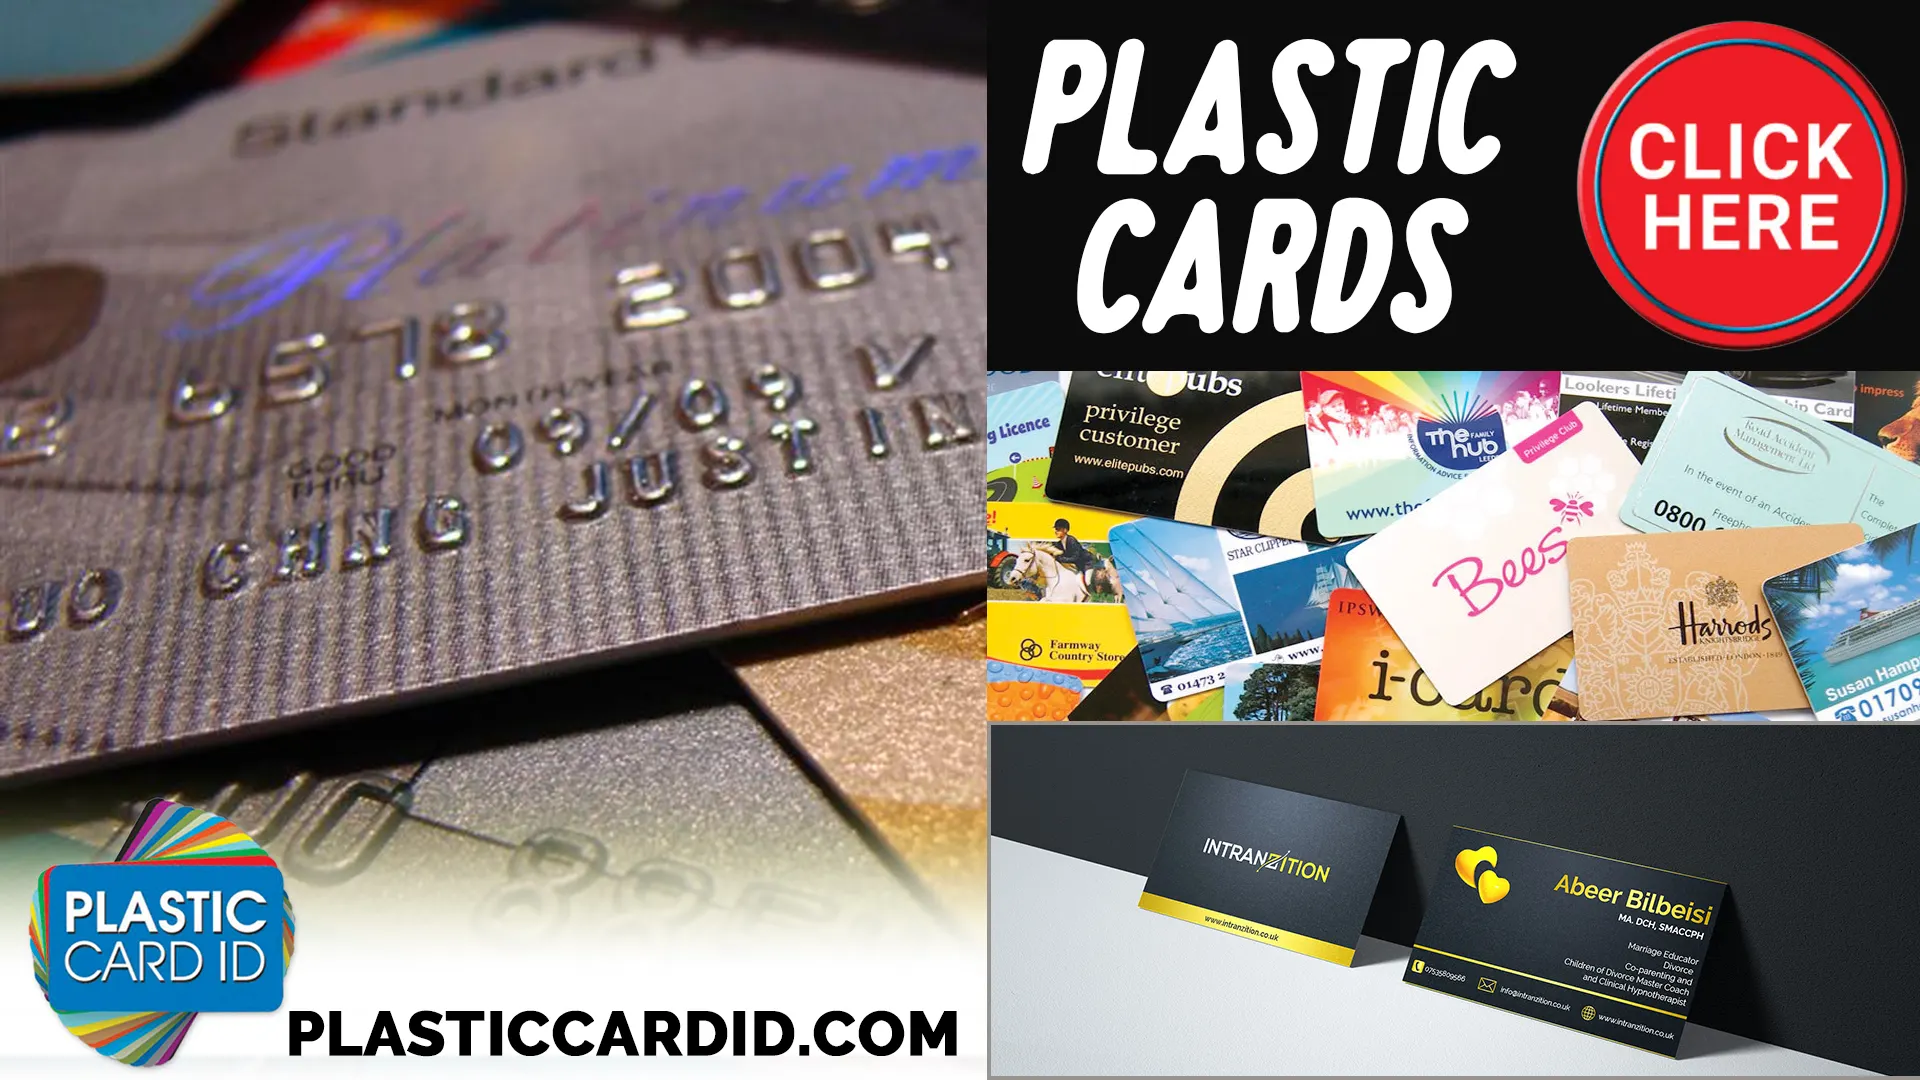 Welcome to Plastic Card ID
: Your One-Stop Shop for Protecting Your Blank Plastic Cards